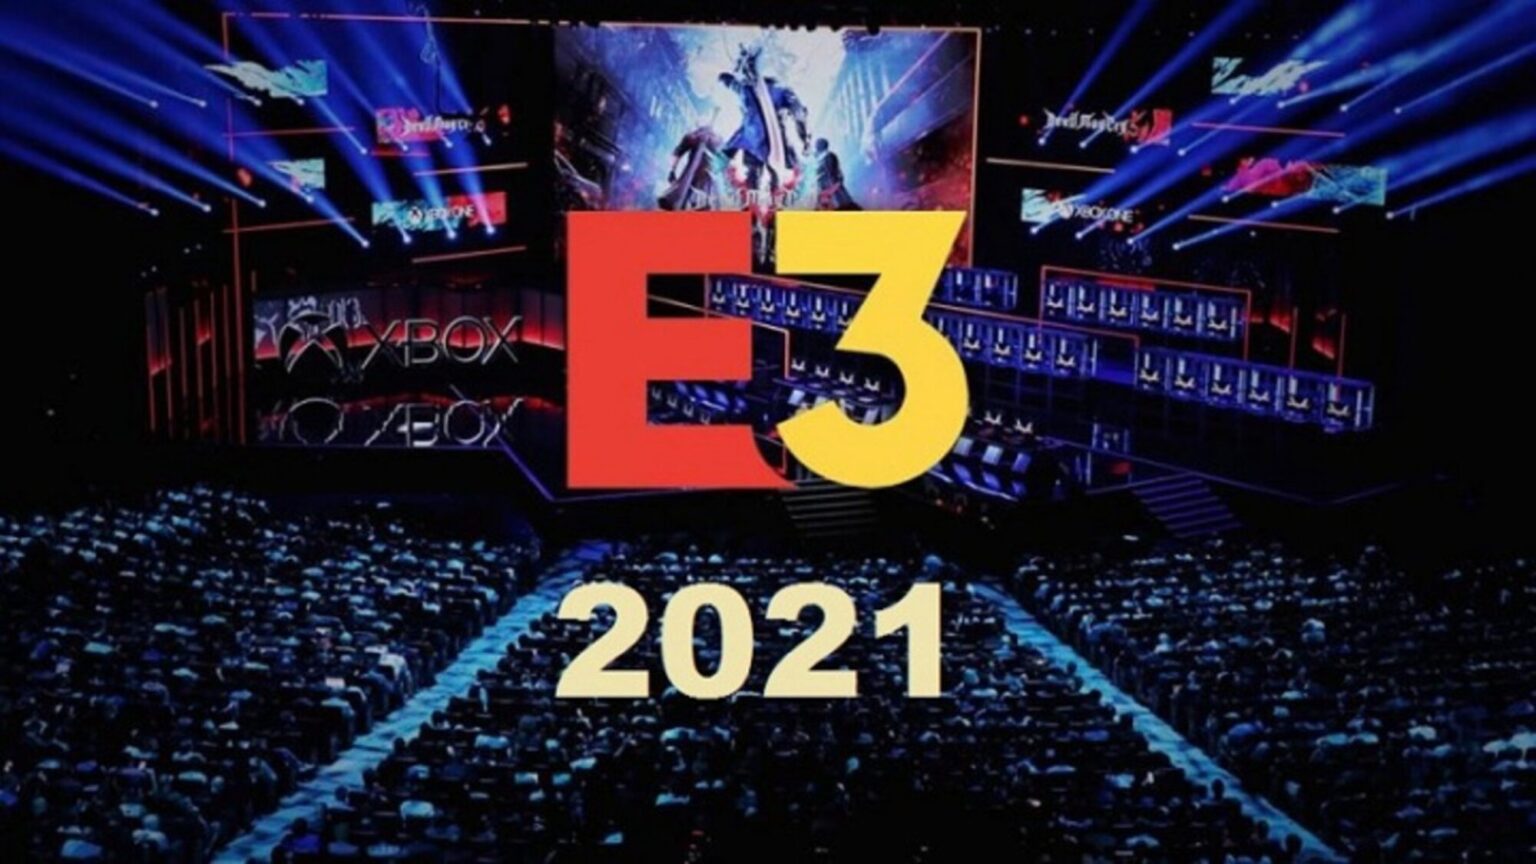 We’re excited to announce that the event is finally back in action and better than ever. So what will E3 2021 bring? Let's find out.